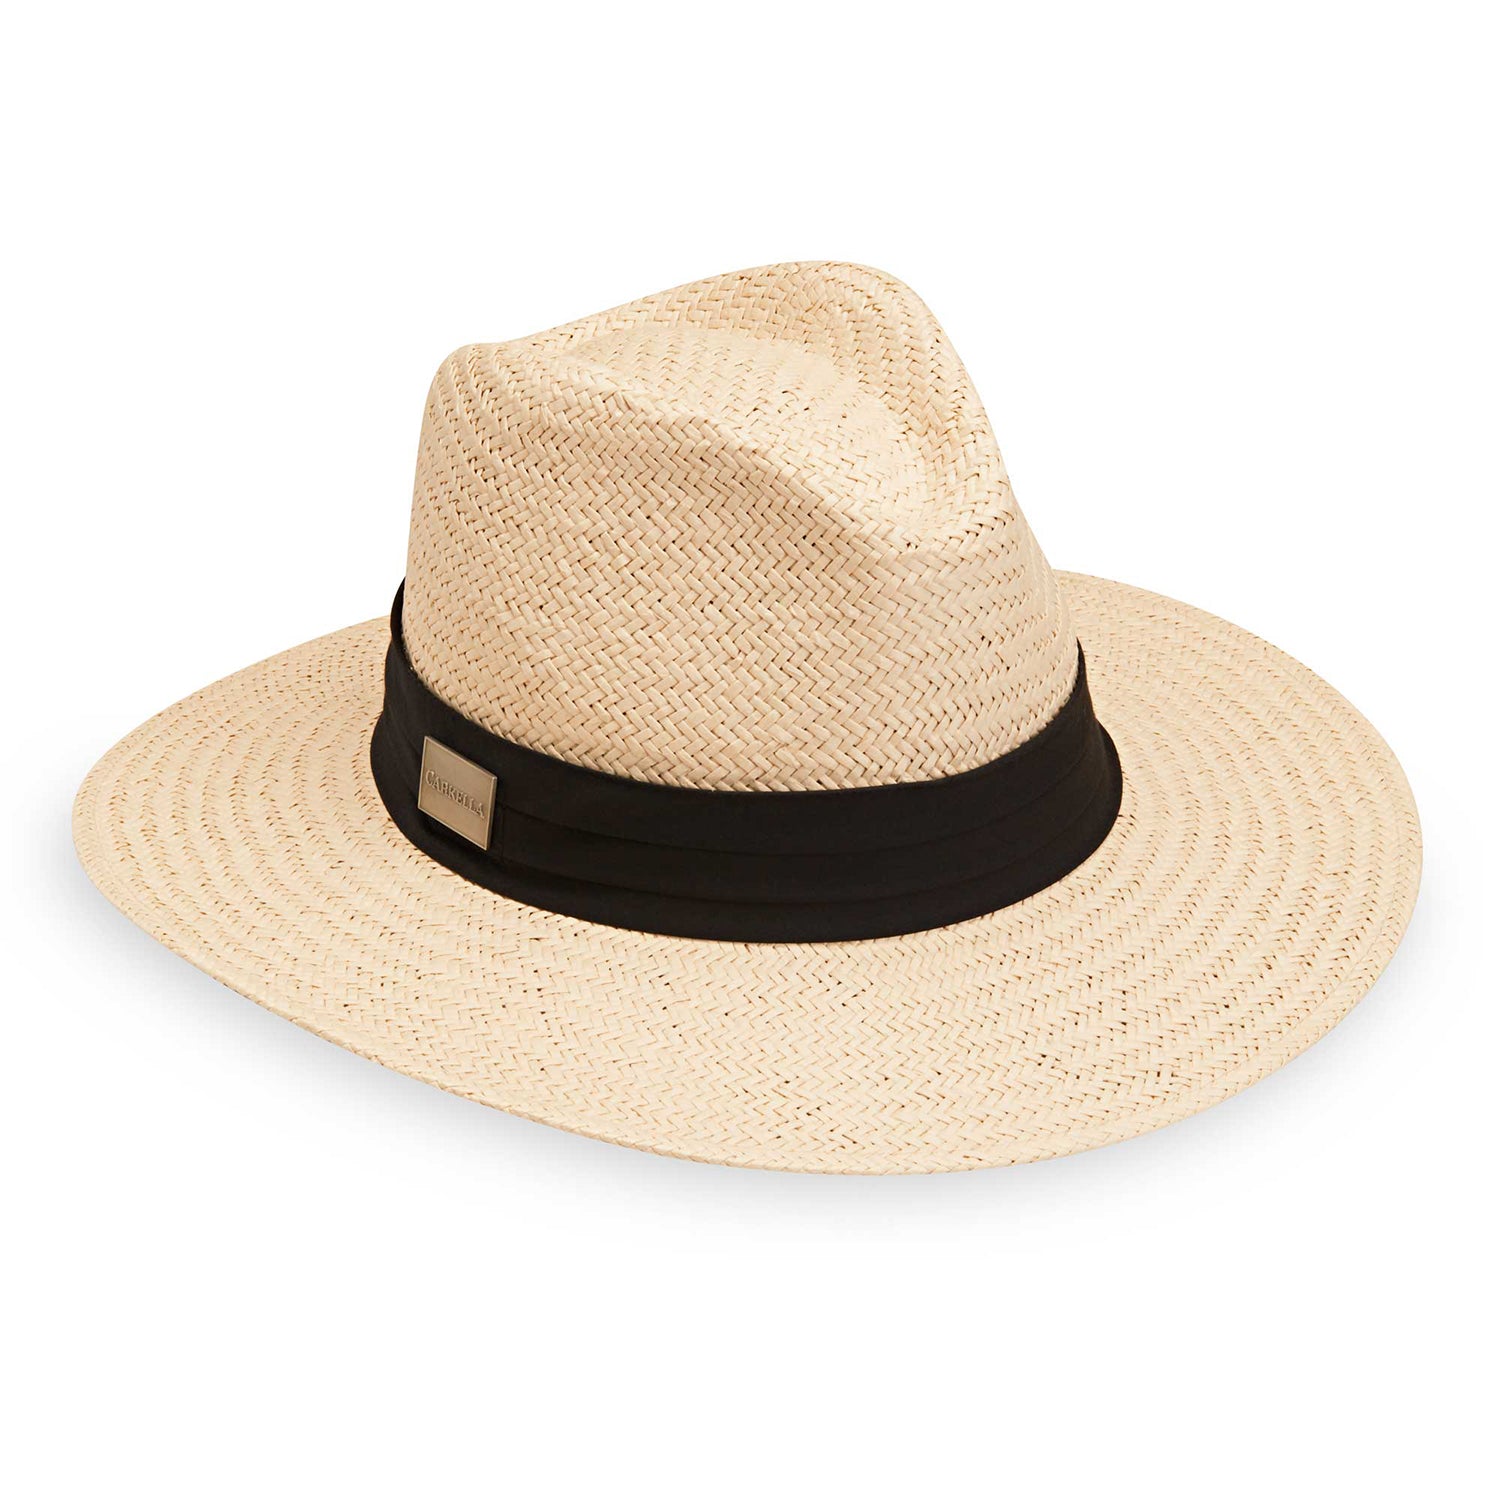 Featuring Portland fedora straw sun hat by Carkella, with a big wide brim and UPF rating 